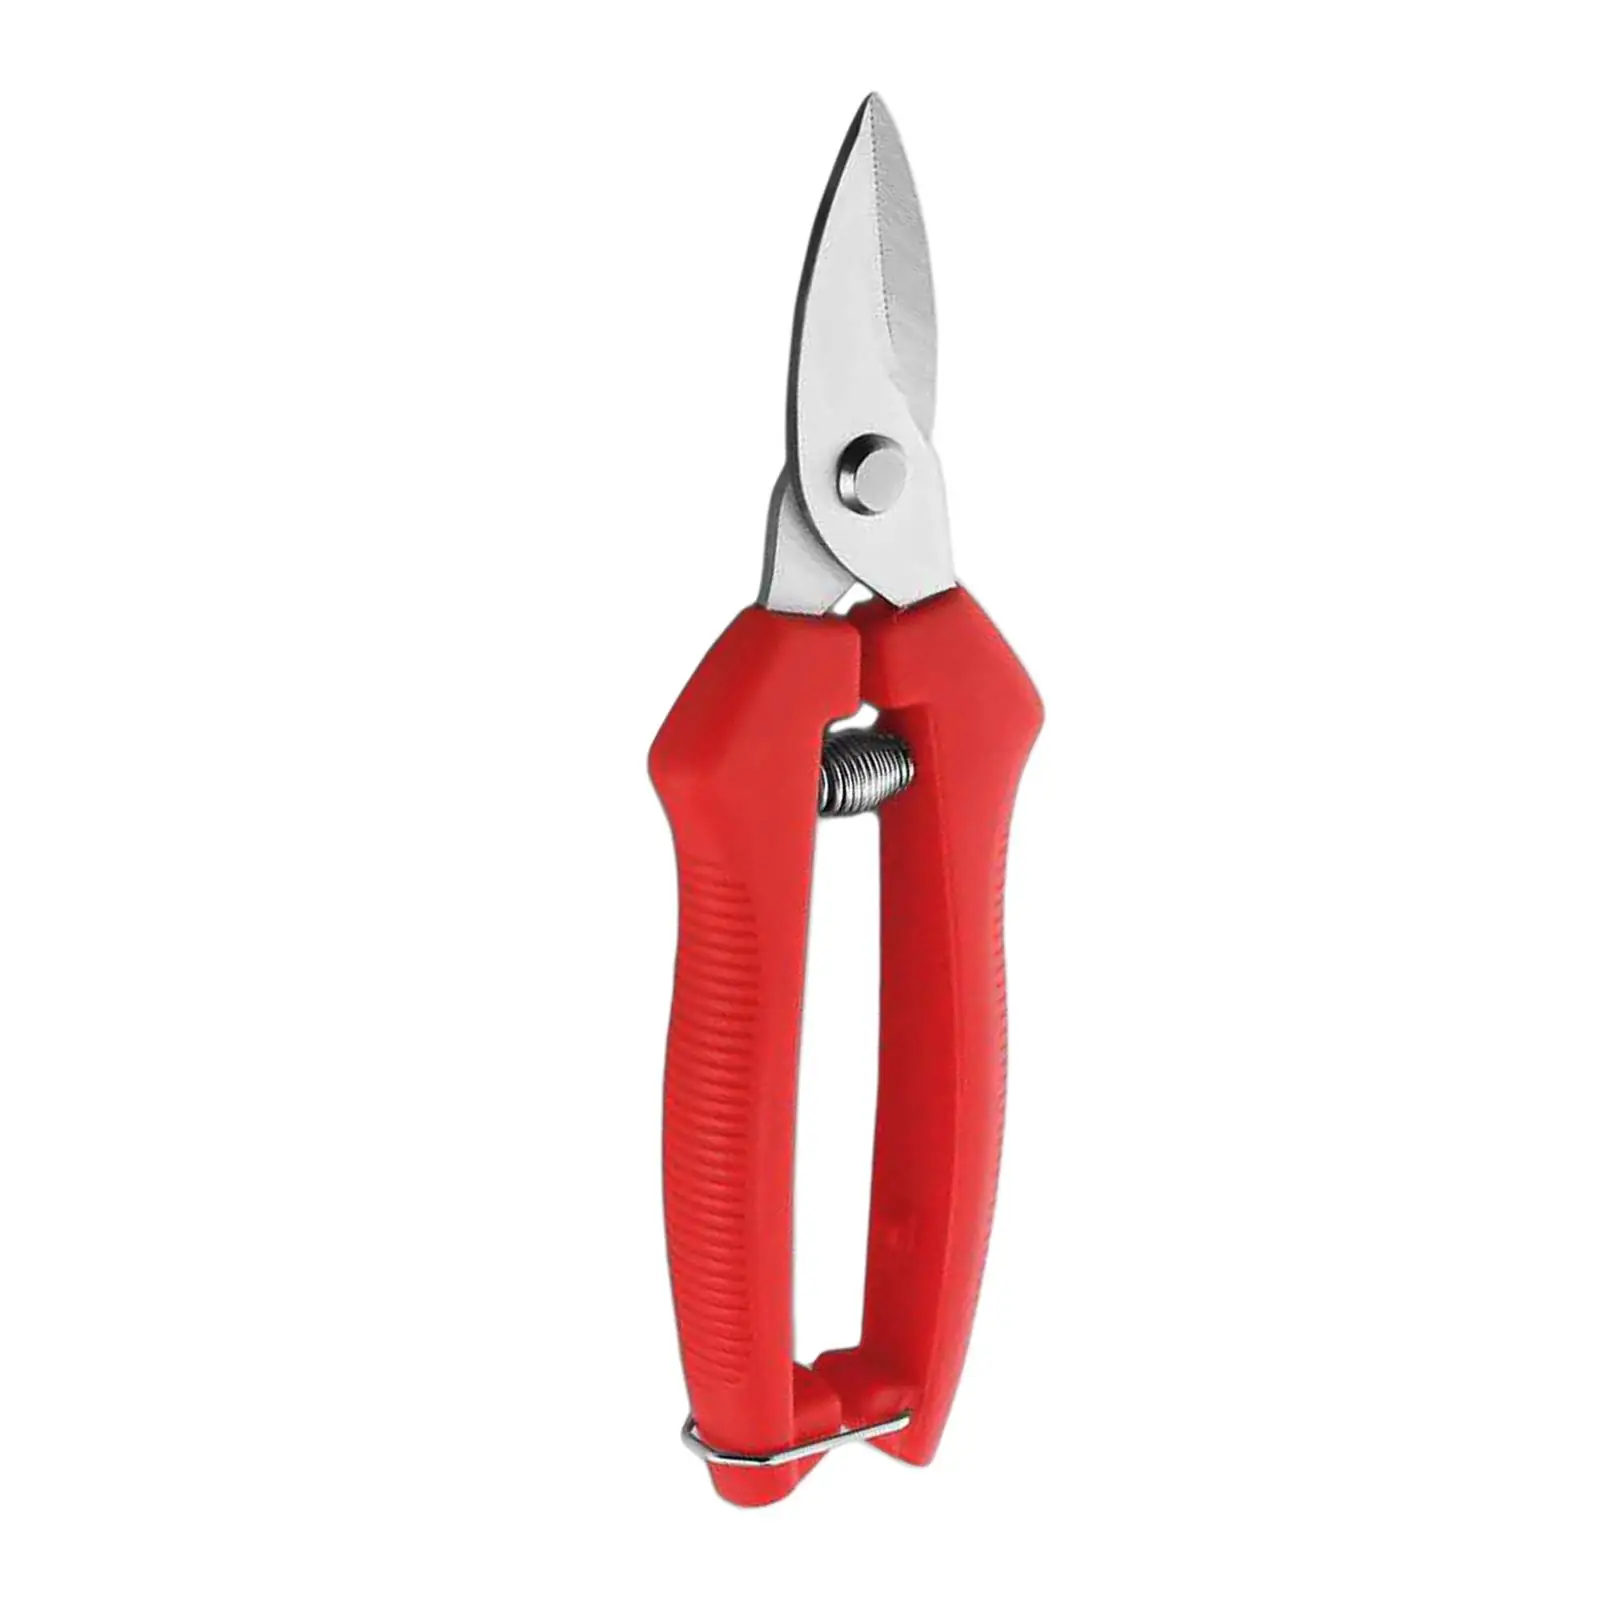 Fruit Picking Shears Scissors with Protective Sleeve Gardening Hand Pruners Fruit Picker Scissors for Garden Thinning Pruning